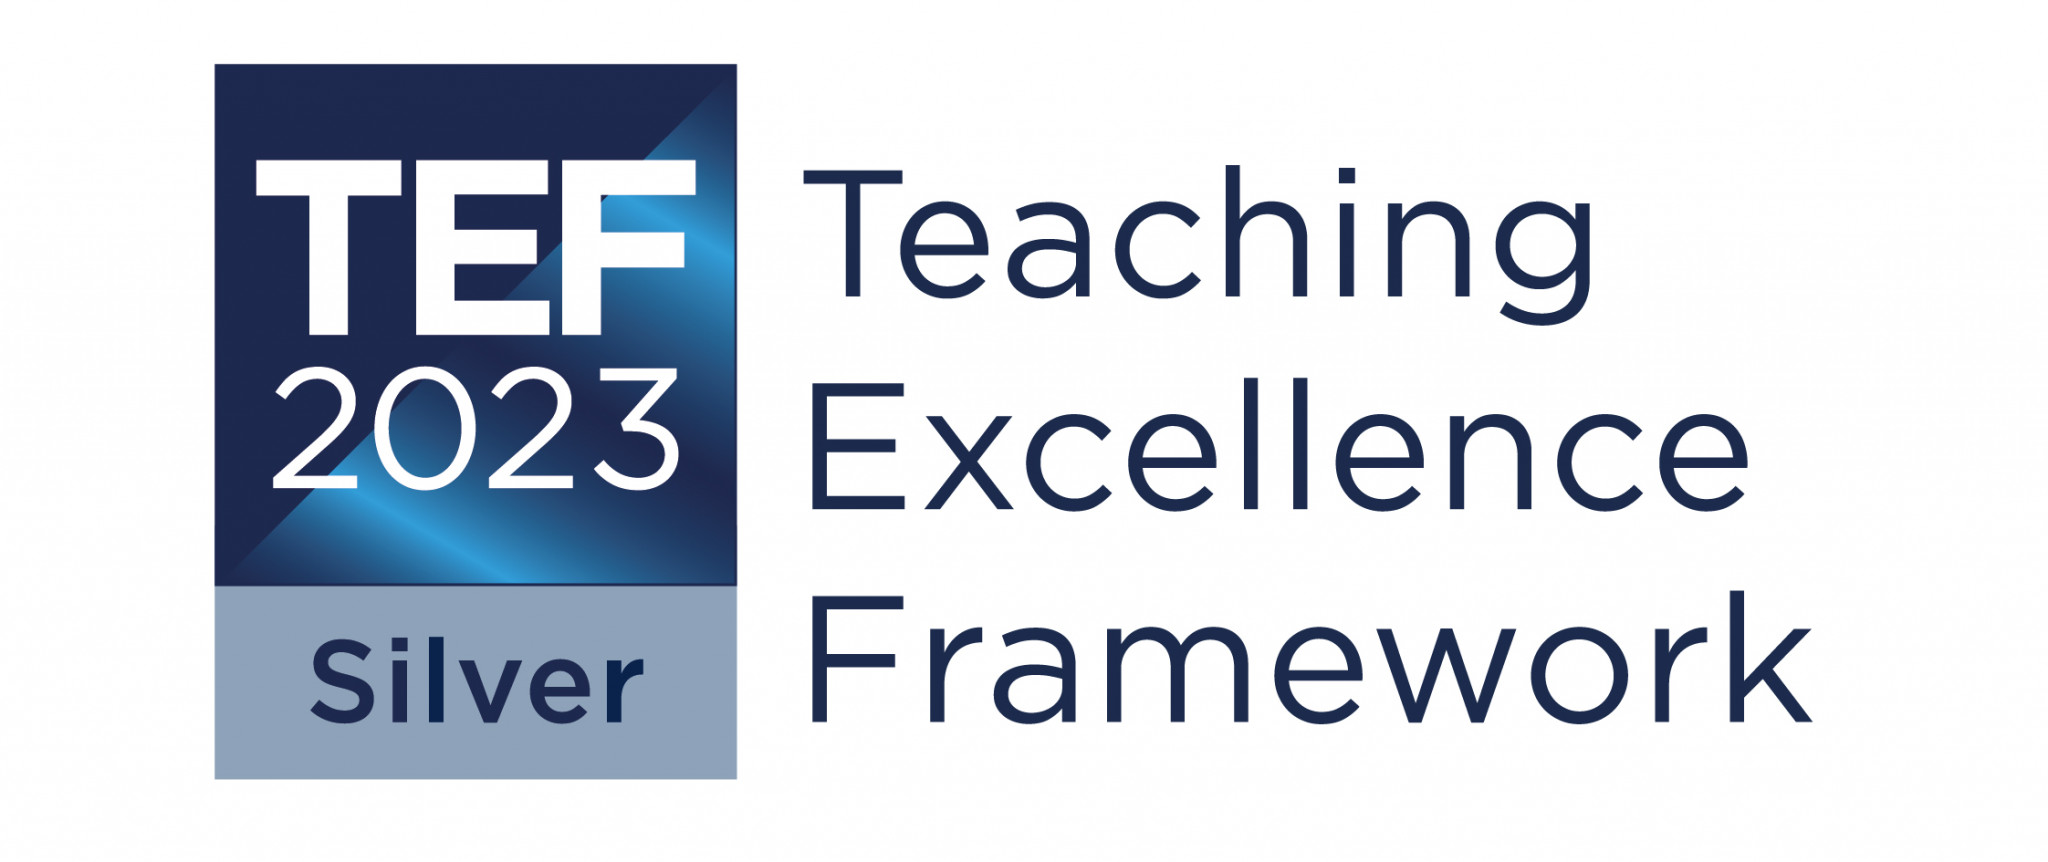 Teaching Excellence Framework: the power of effective collaboration